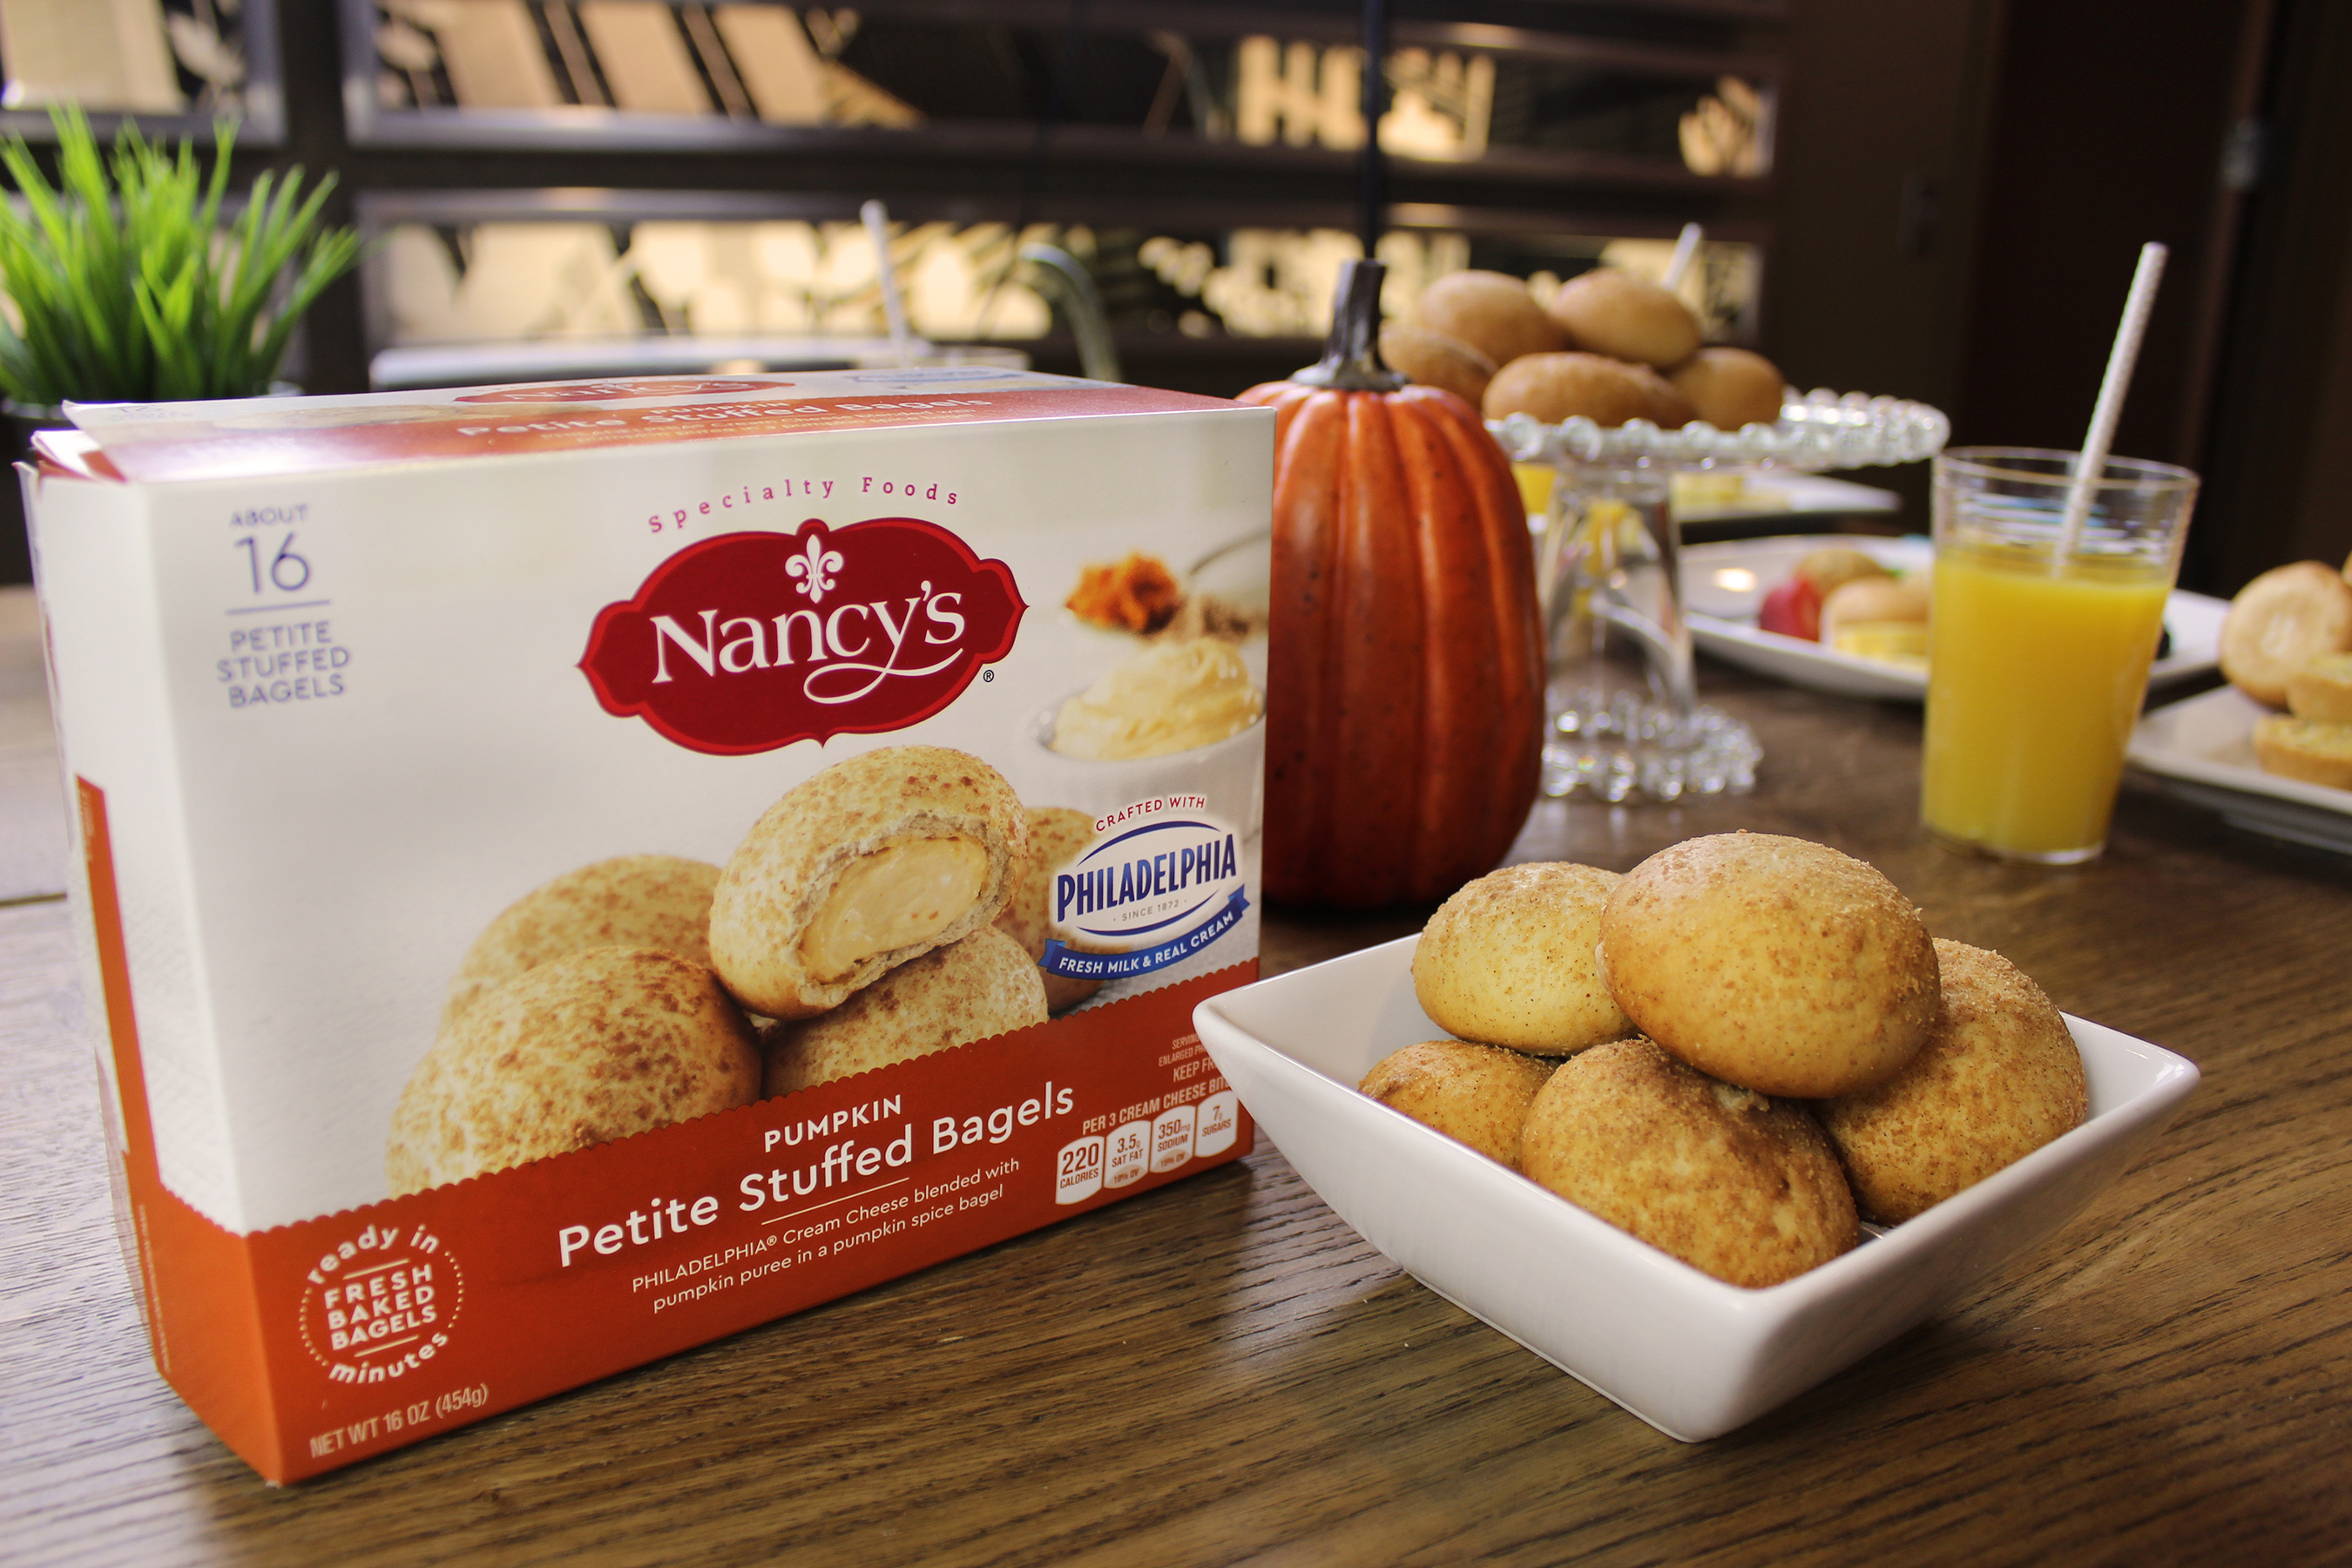 Enjoy a fall flavor favorite with Nancy's Petite Pumpkin Stuffed Bagels made with PHILADELPHIA Cream Cheese blended with pumpkin puree in a pumpkin spice bagel (exclusively at Walmart)